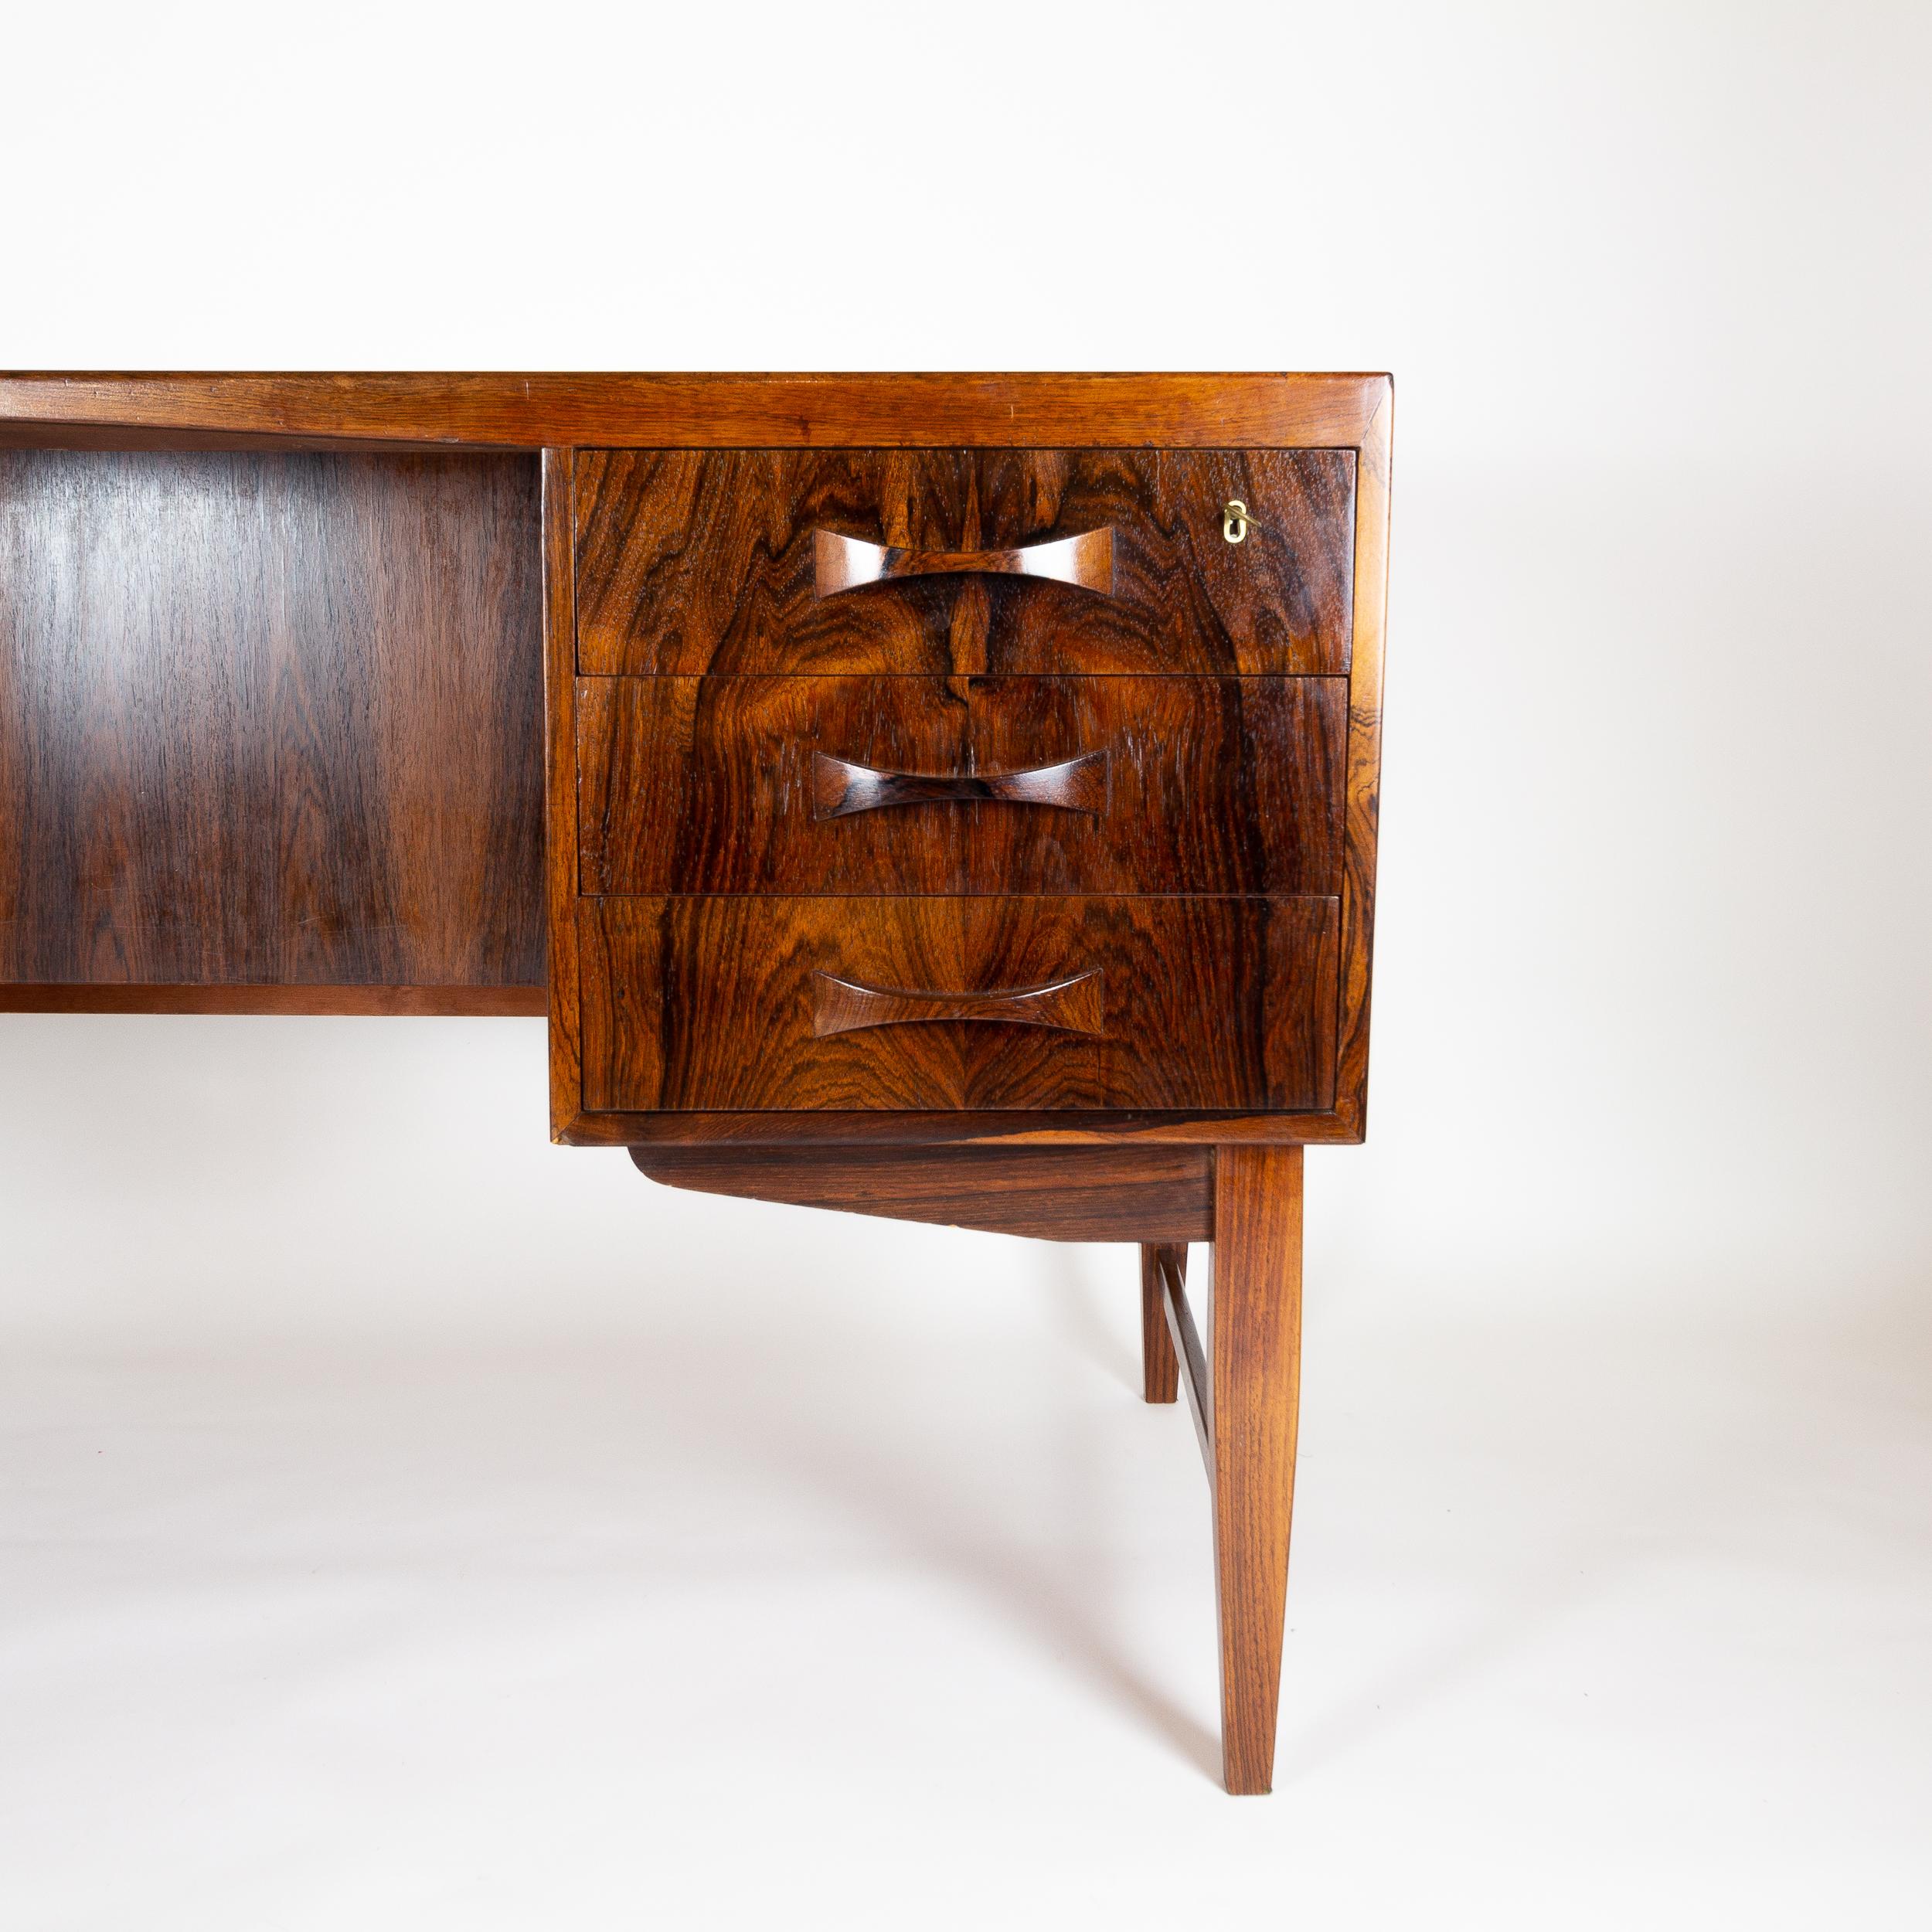 A fabulous Brazilian rosewood desk, Denmark, 1960s. Top drawers are locking. Double sided with bookshelf to the rear.